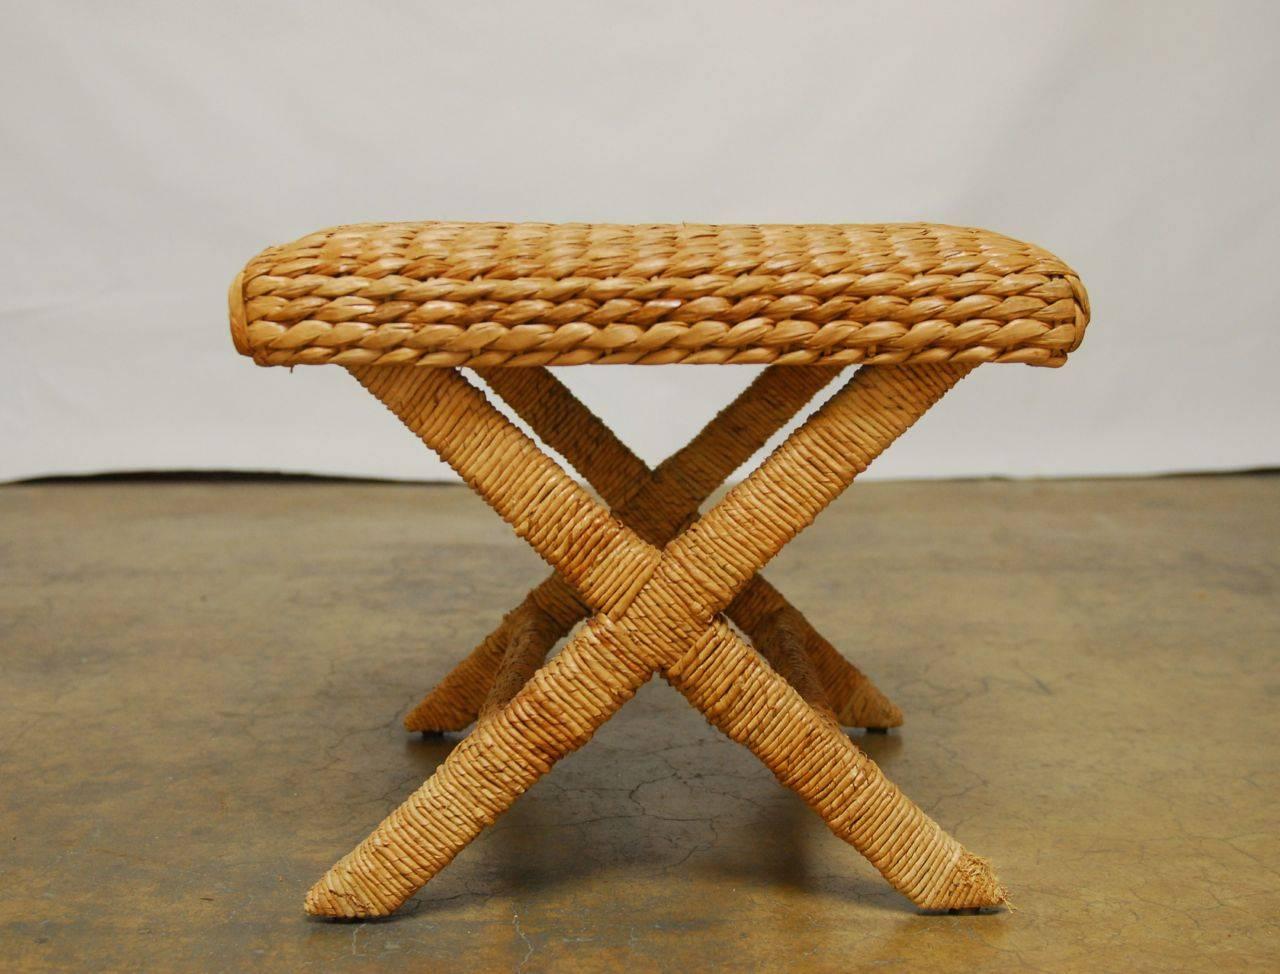 Fantastic pair of woven seagrass stools in the Classic X-form. Simple and rustic, yet contemporary lines, these will fit into almost any decor. Each leg is wrapped with a seagrass rope that completes the coastal bench look.